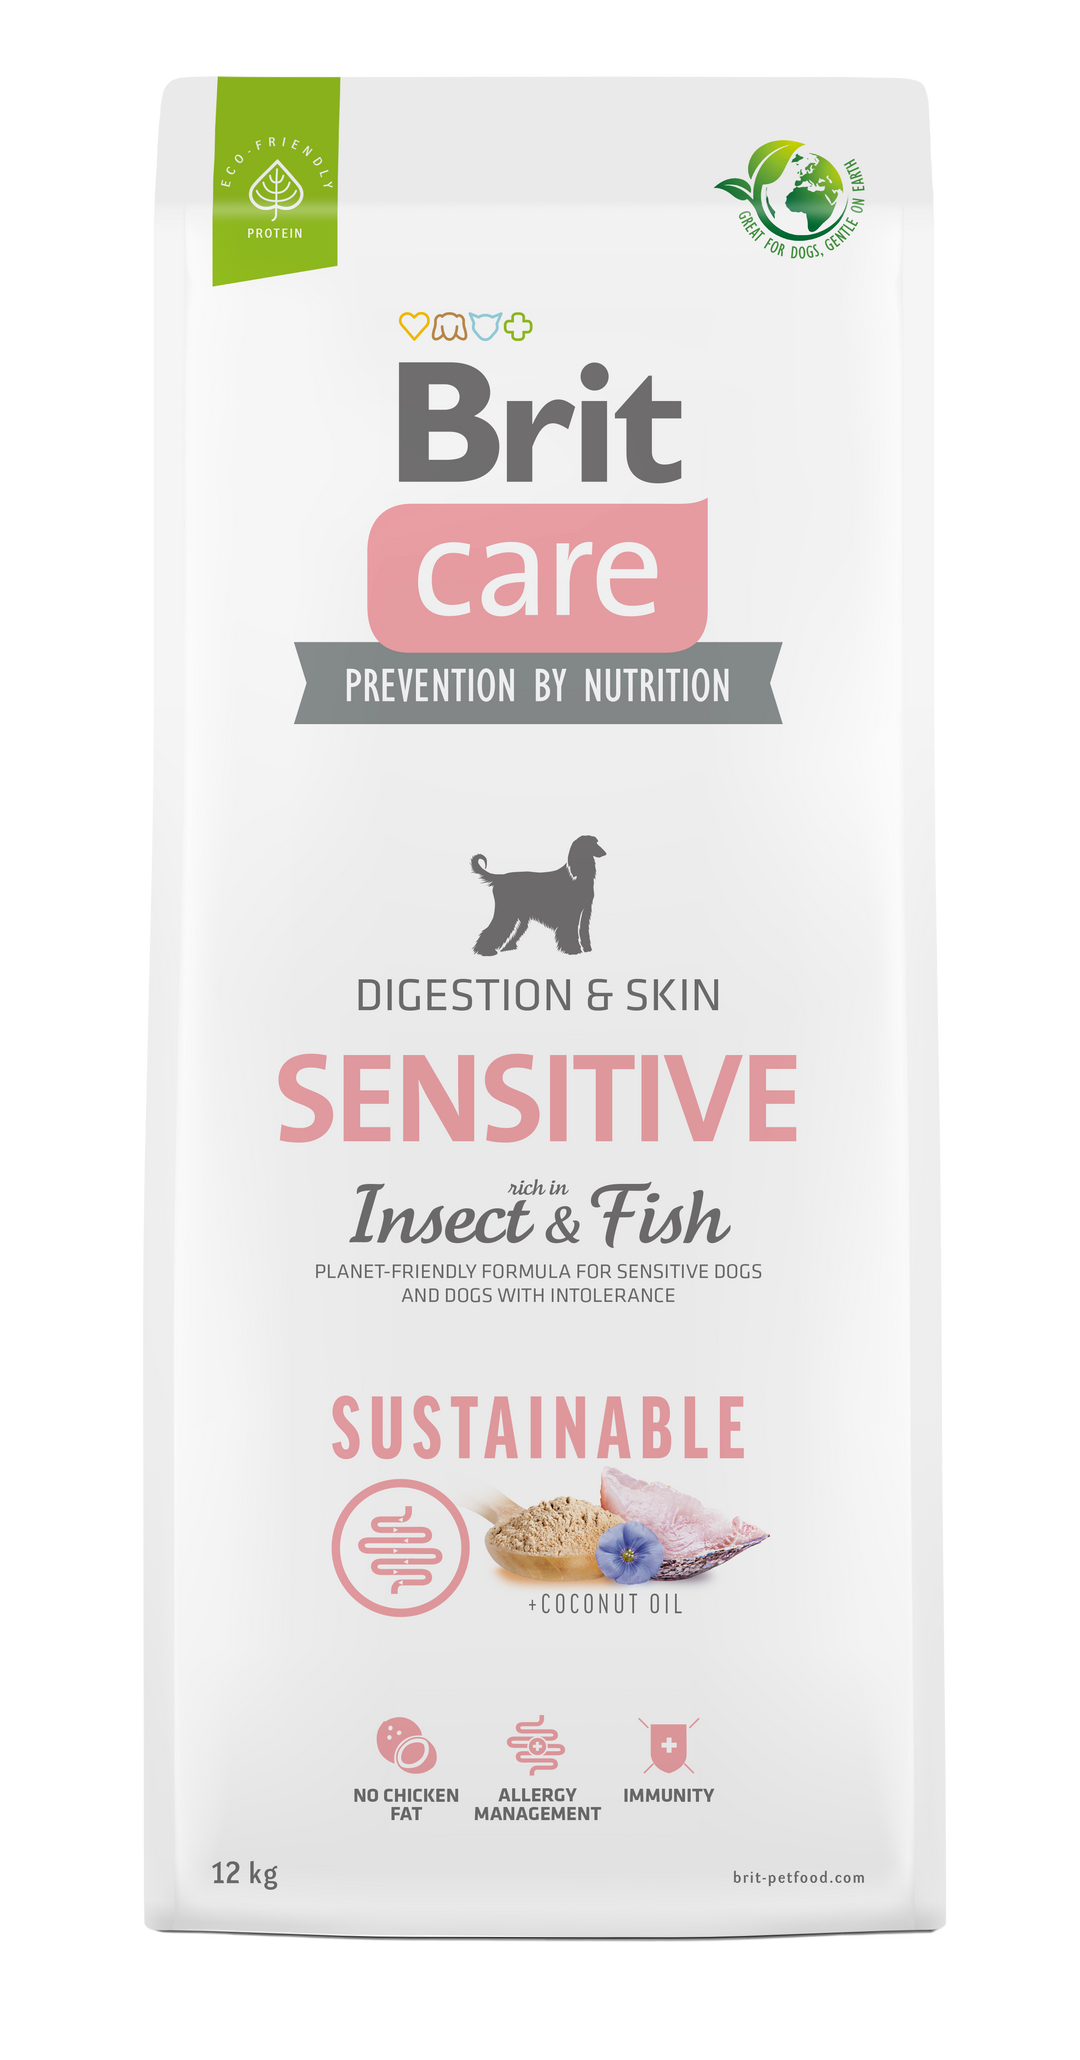 Brit Digestion & Skin Sensitive, Insect & Fish